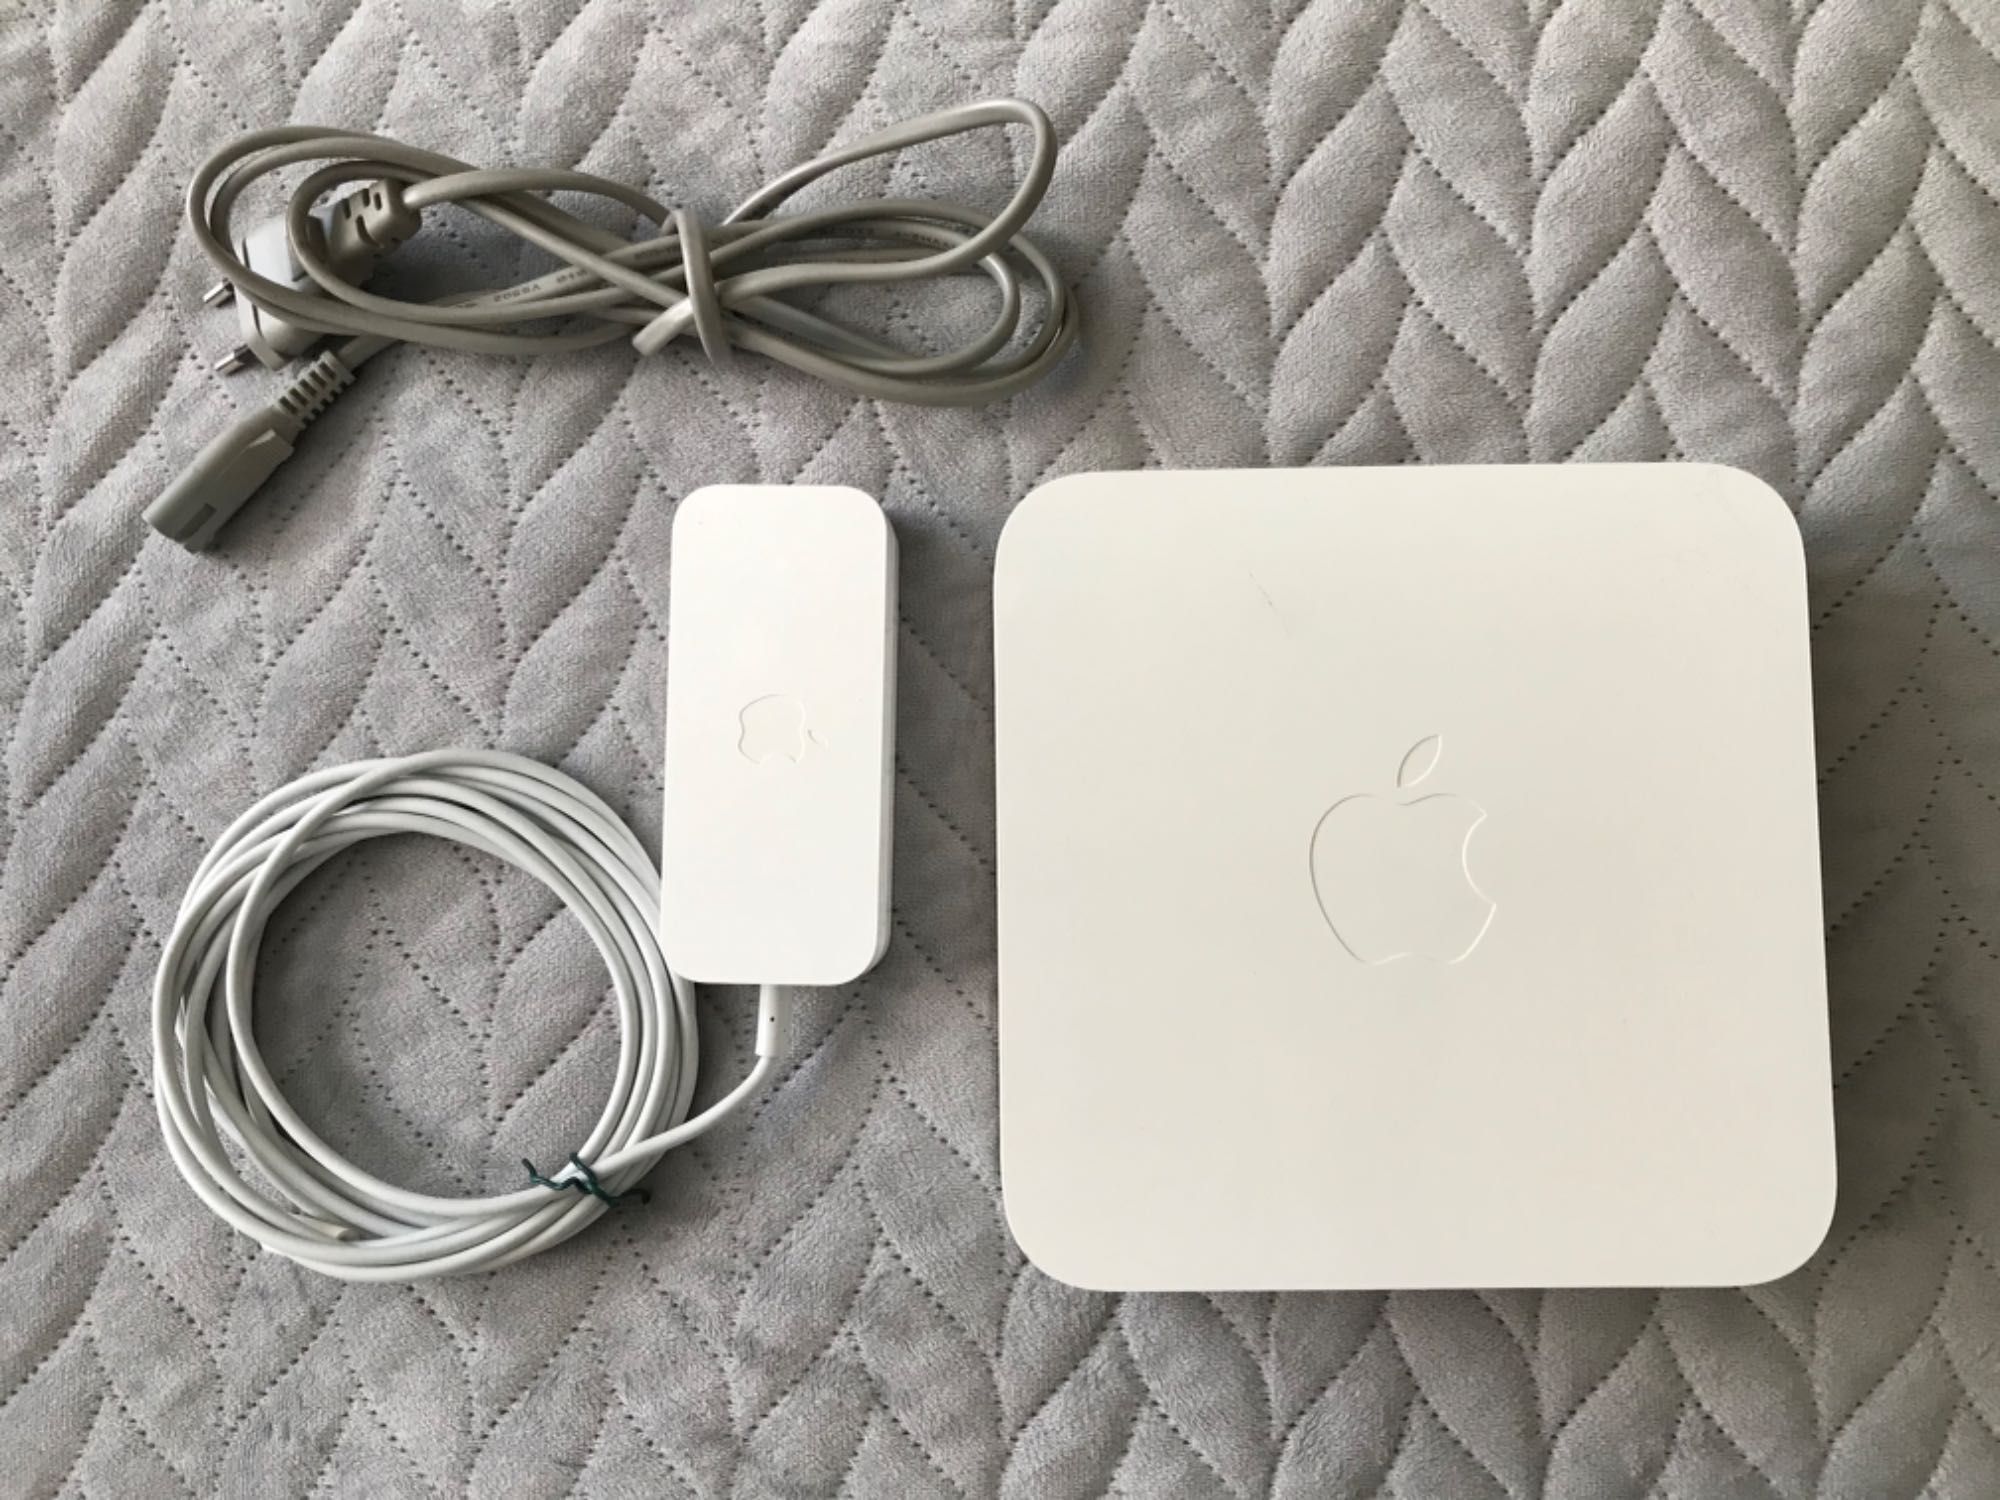 Apple AirPort Extreme A1143